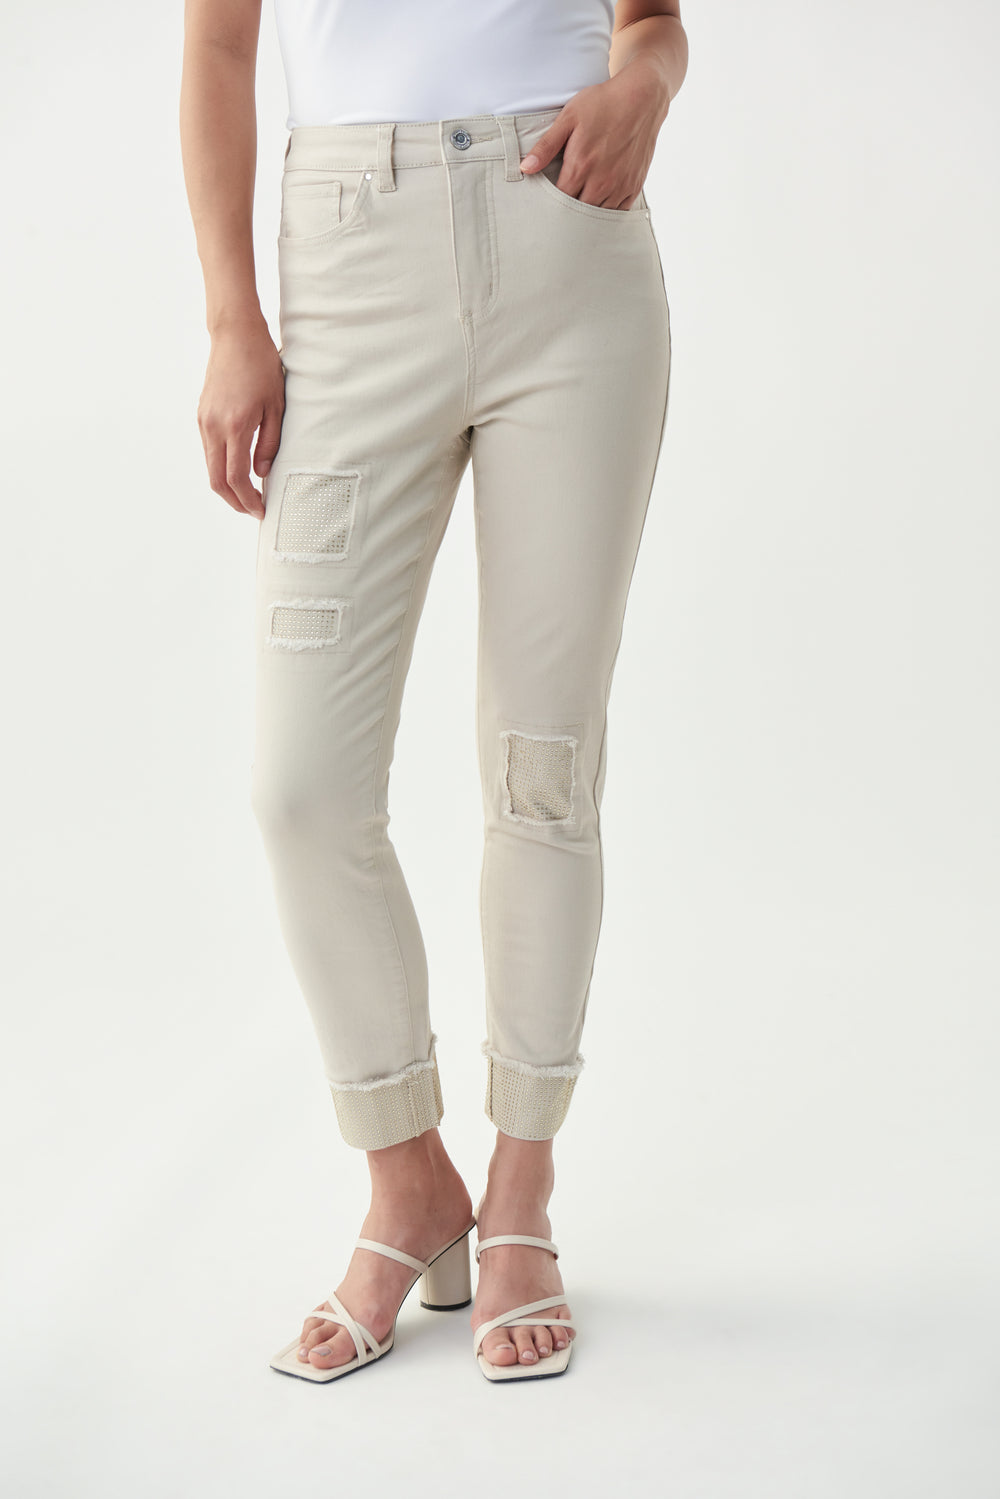 Joseph Ribkoff Spring 2022 women's casual light wash distressed patch cropped jeans with rolled hem - Moonstone front